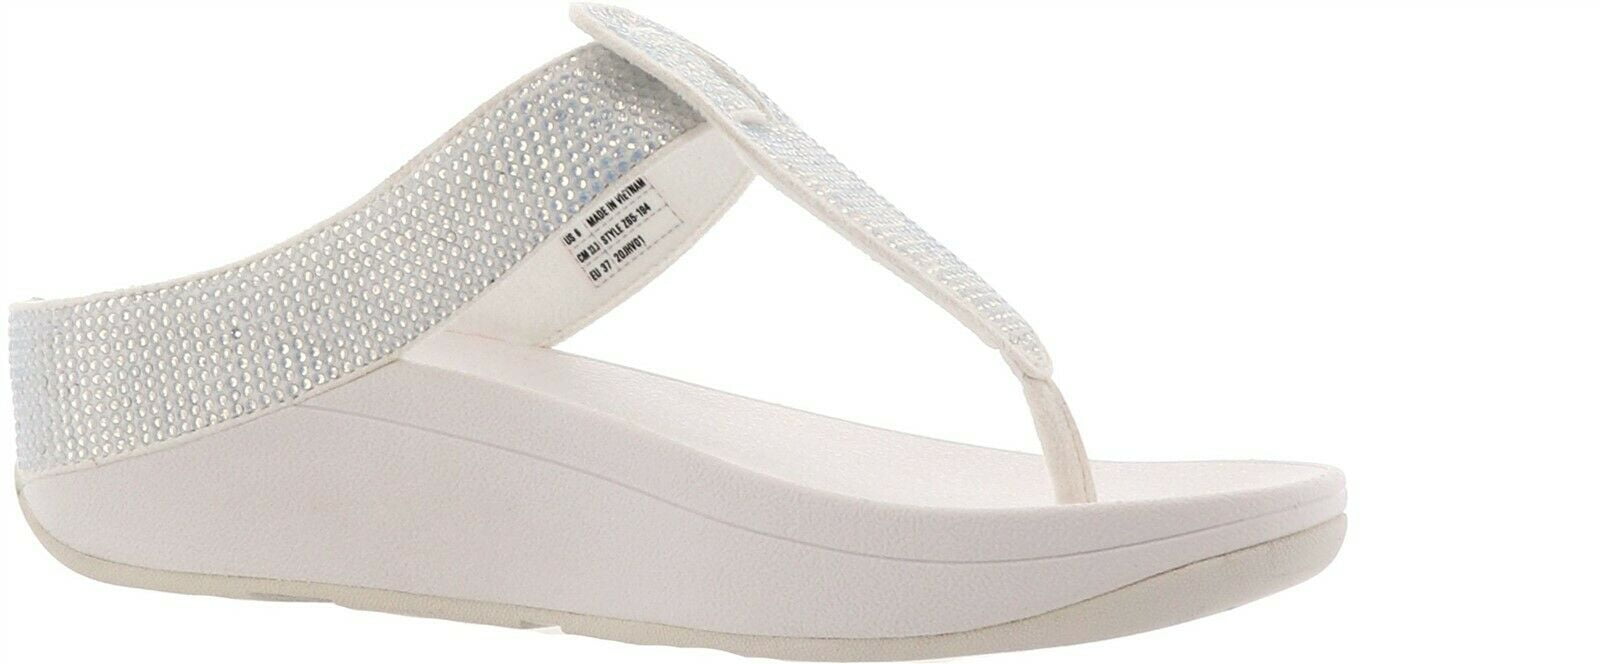 FitFlop - FitFlop Isabelle Crystal Toe 